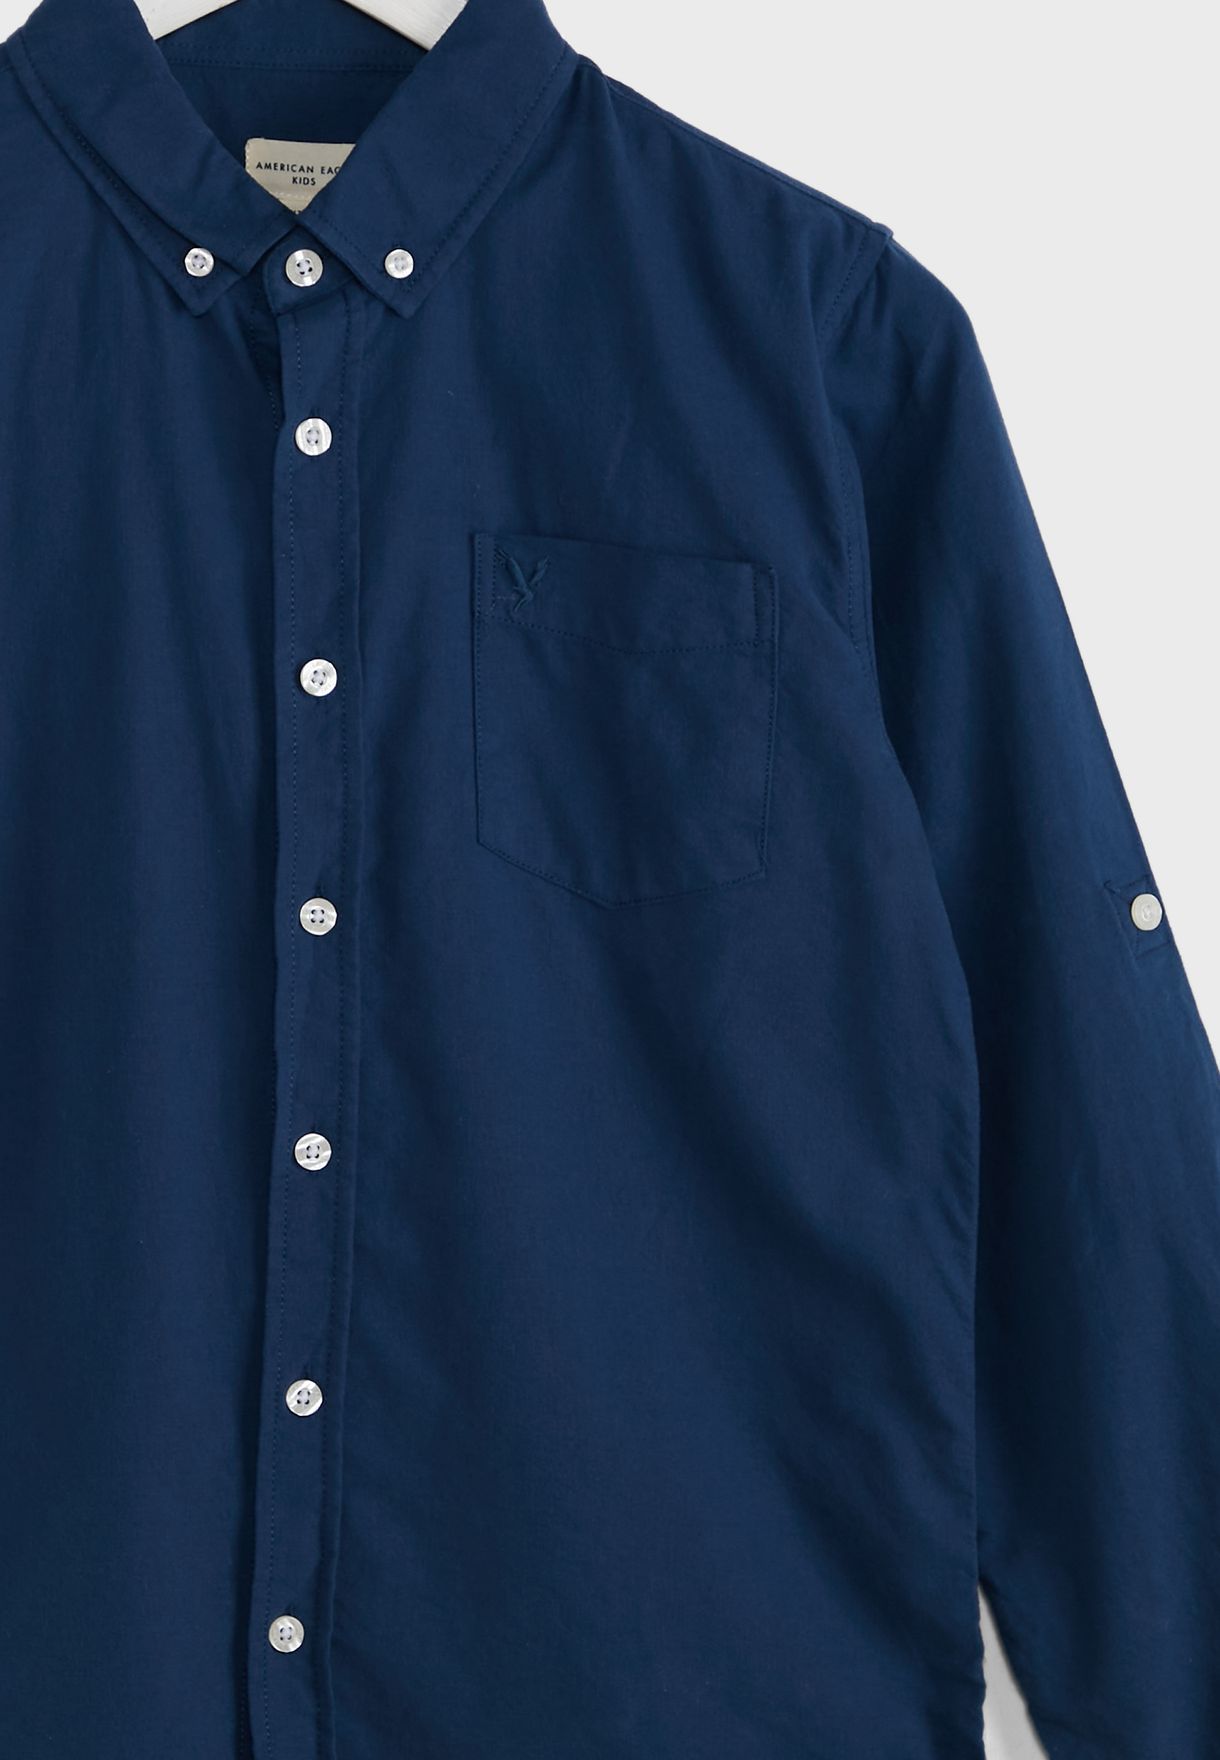 Youth Oxford Button Down Shirt